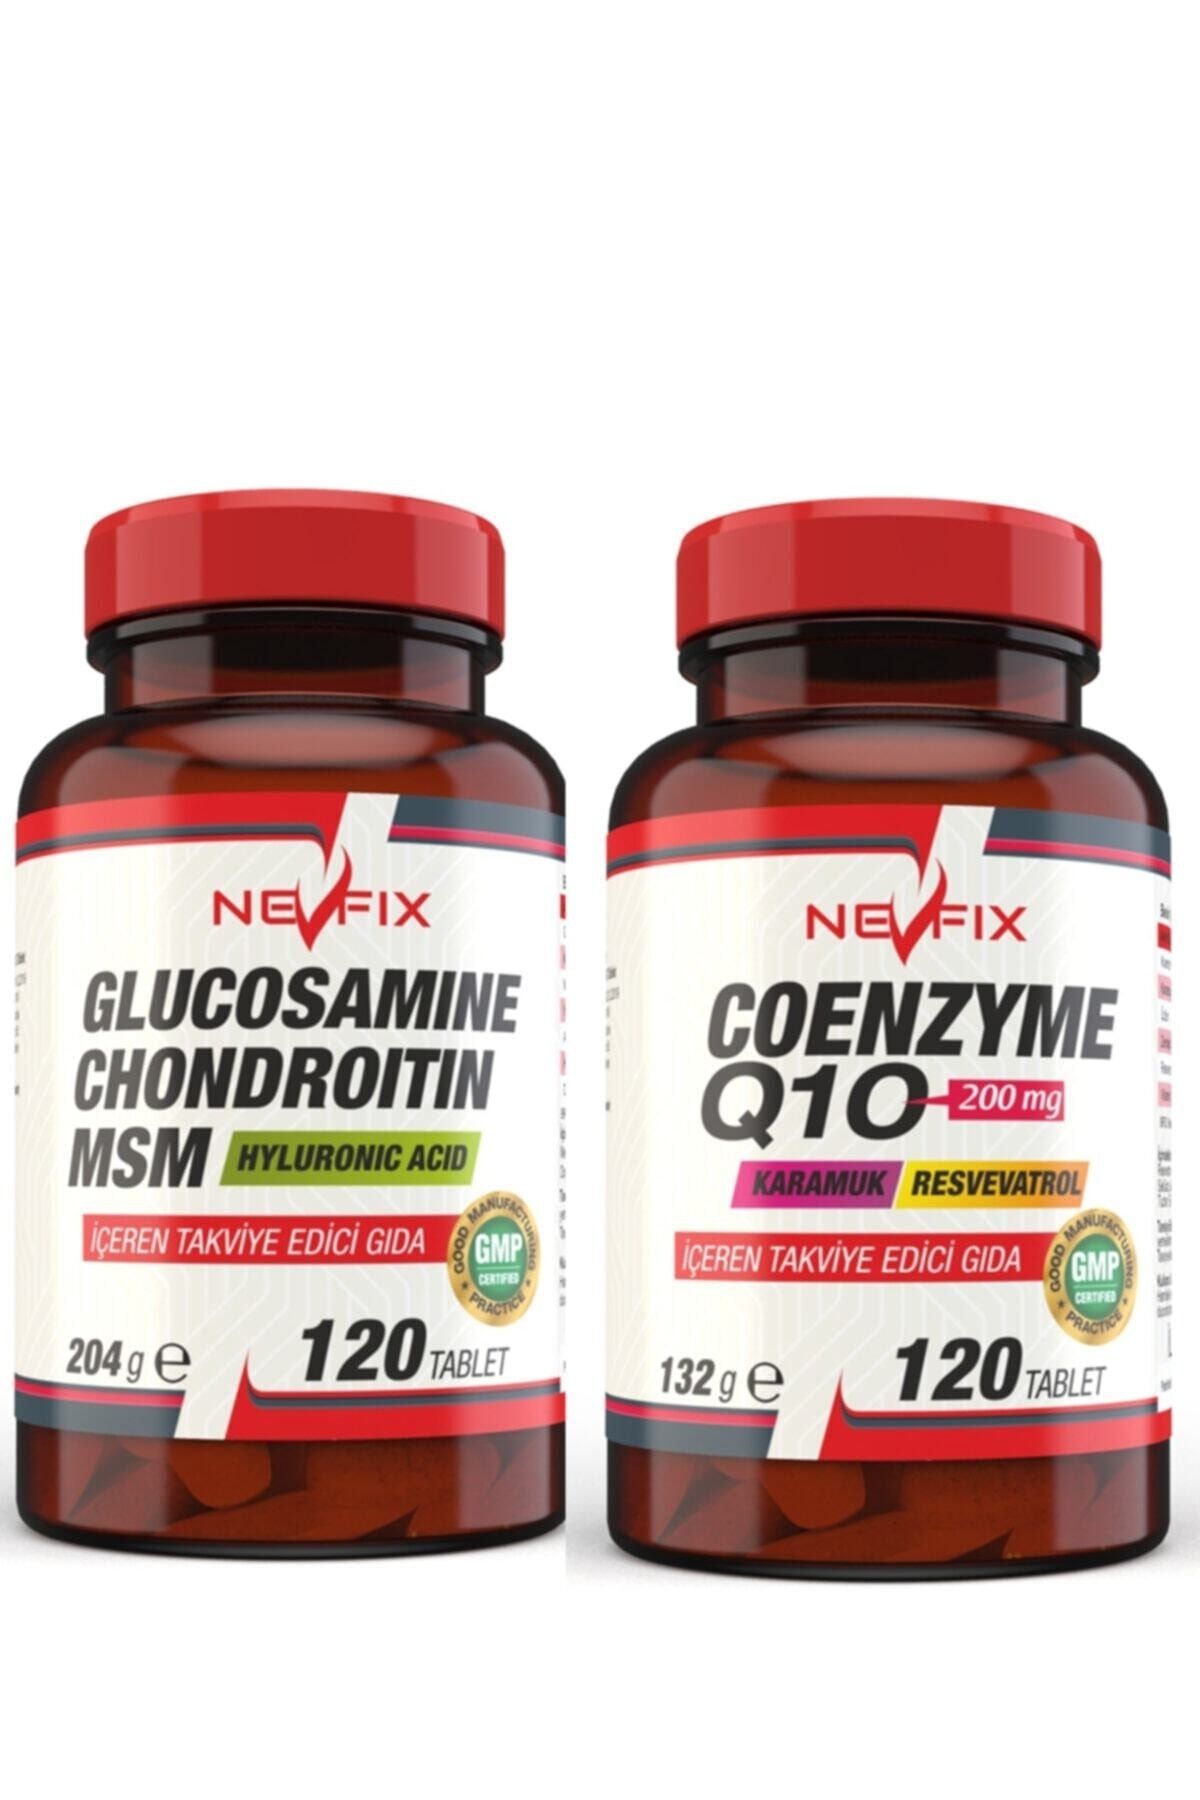 Nevfix Glucosamine Chondroitin Msm 120 Tablet Coenzyme Q10 200 Mg 120 Tablet